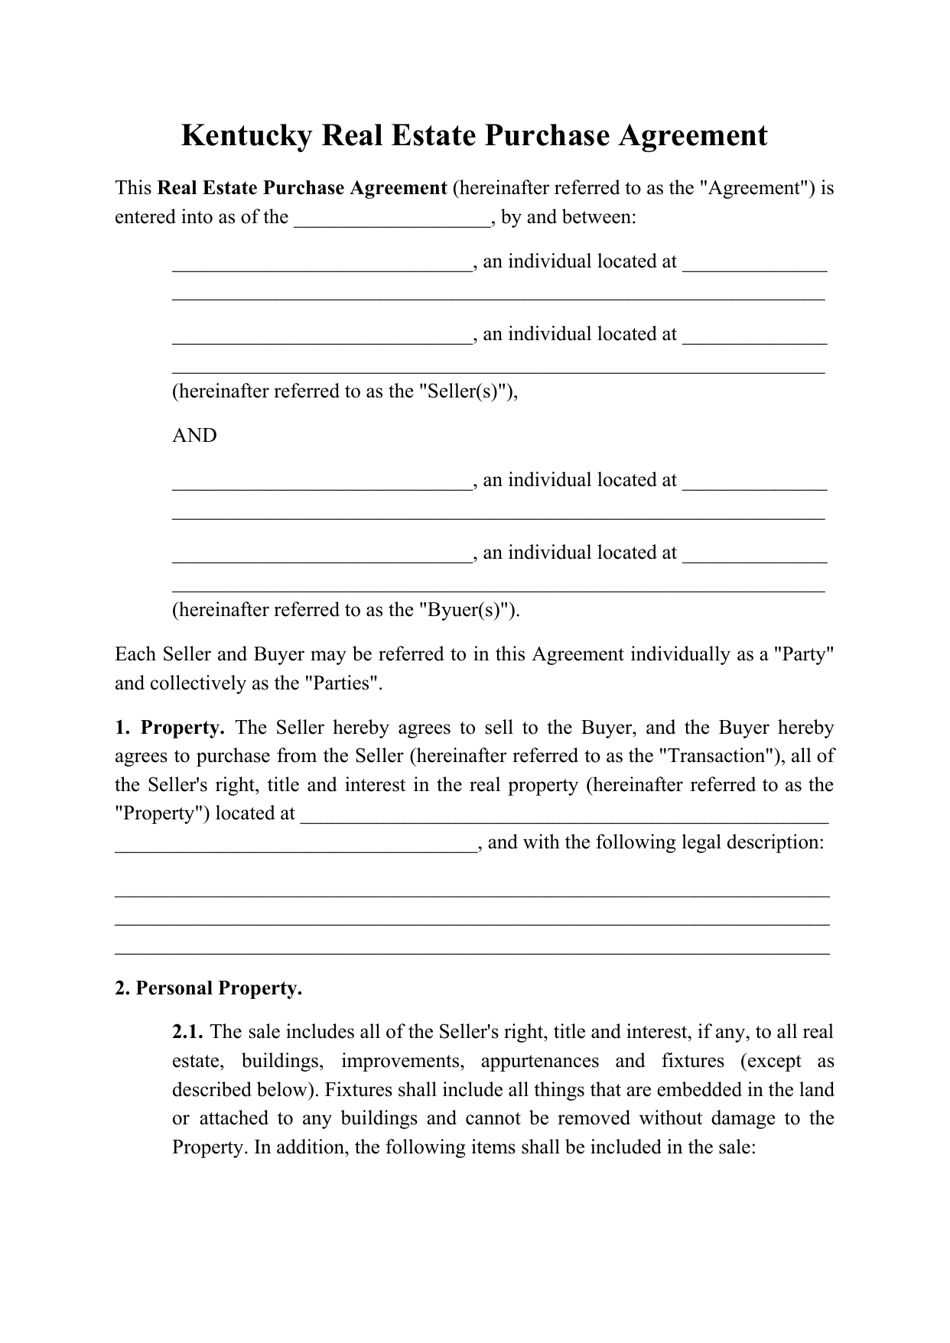 Real Estate Purchase Agreement Template - Kentucky, Page 1